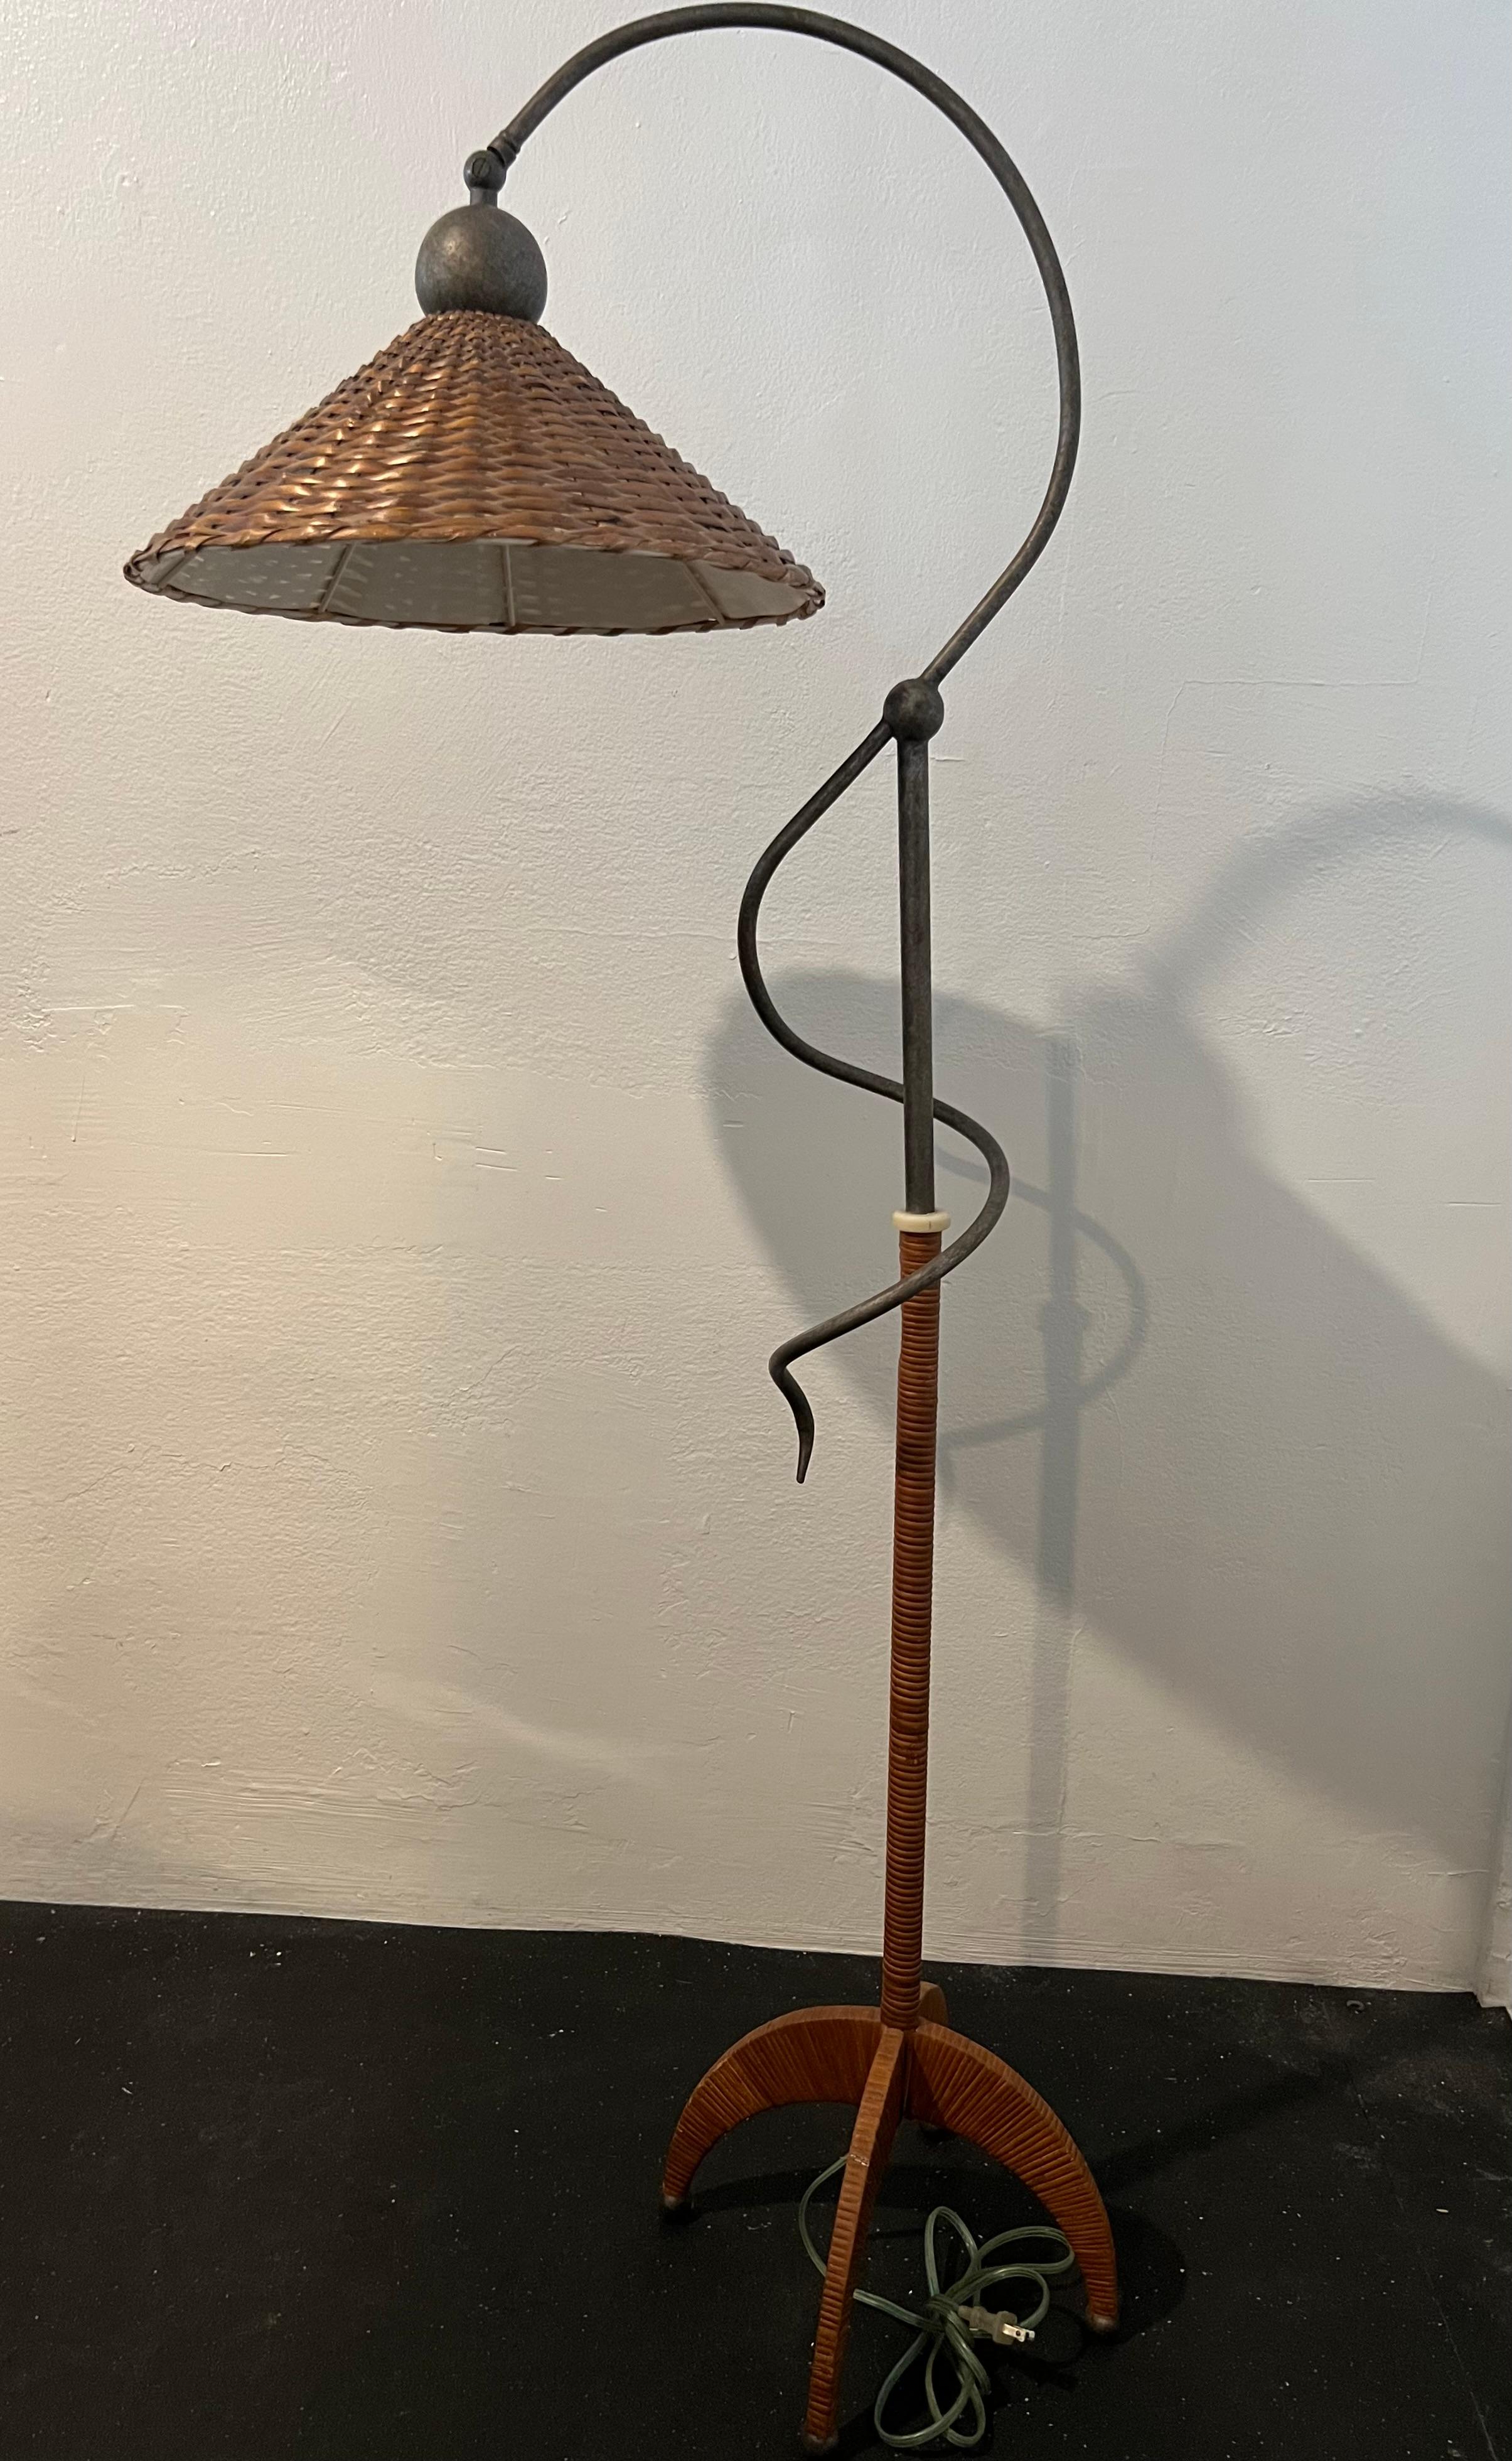 Sculptural cane wrapped floor lamp. Has the ability to telescope and the shade pivots. Original wiring. Some minor imperfections to the wicker and cane (please refer to the photos). Additional photos available upon request.

Would work well in a